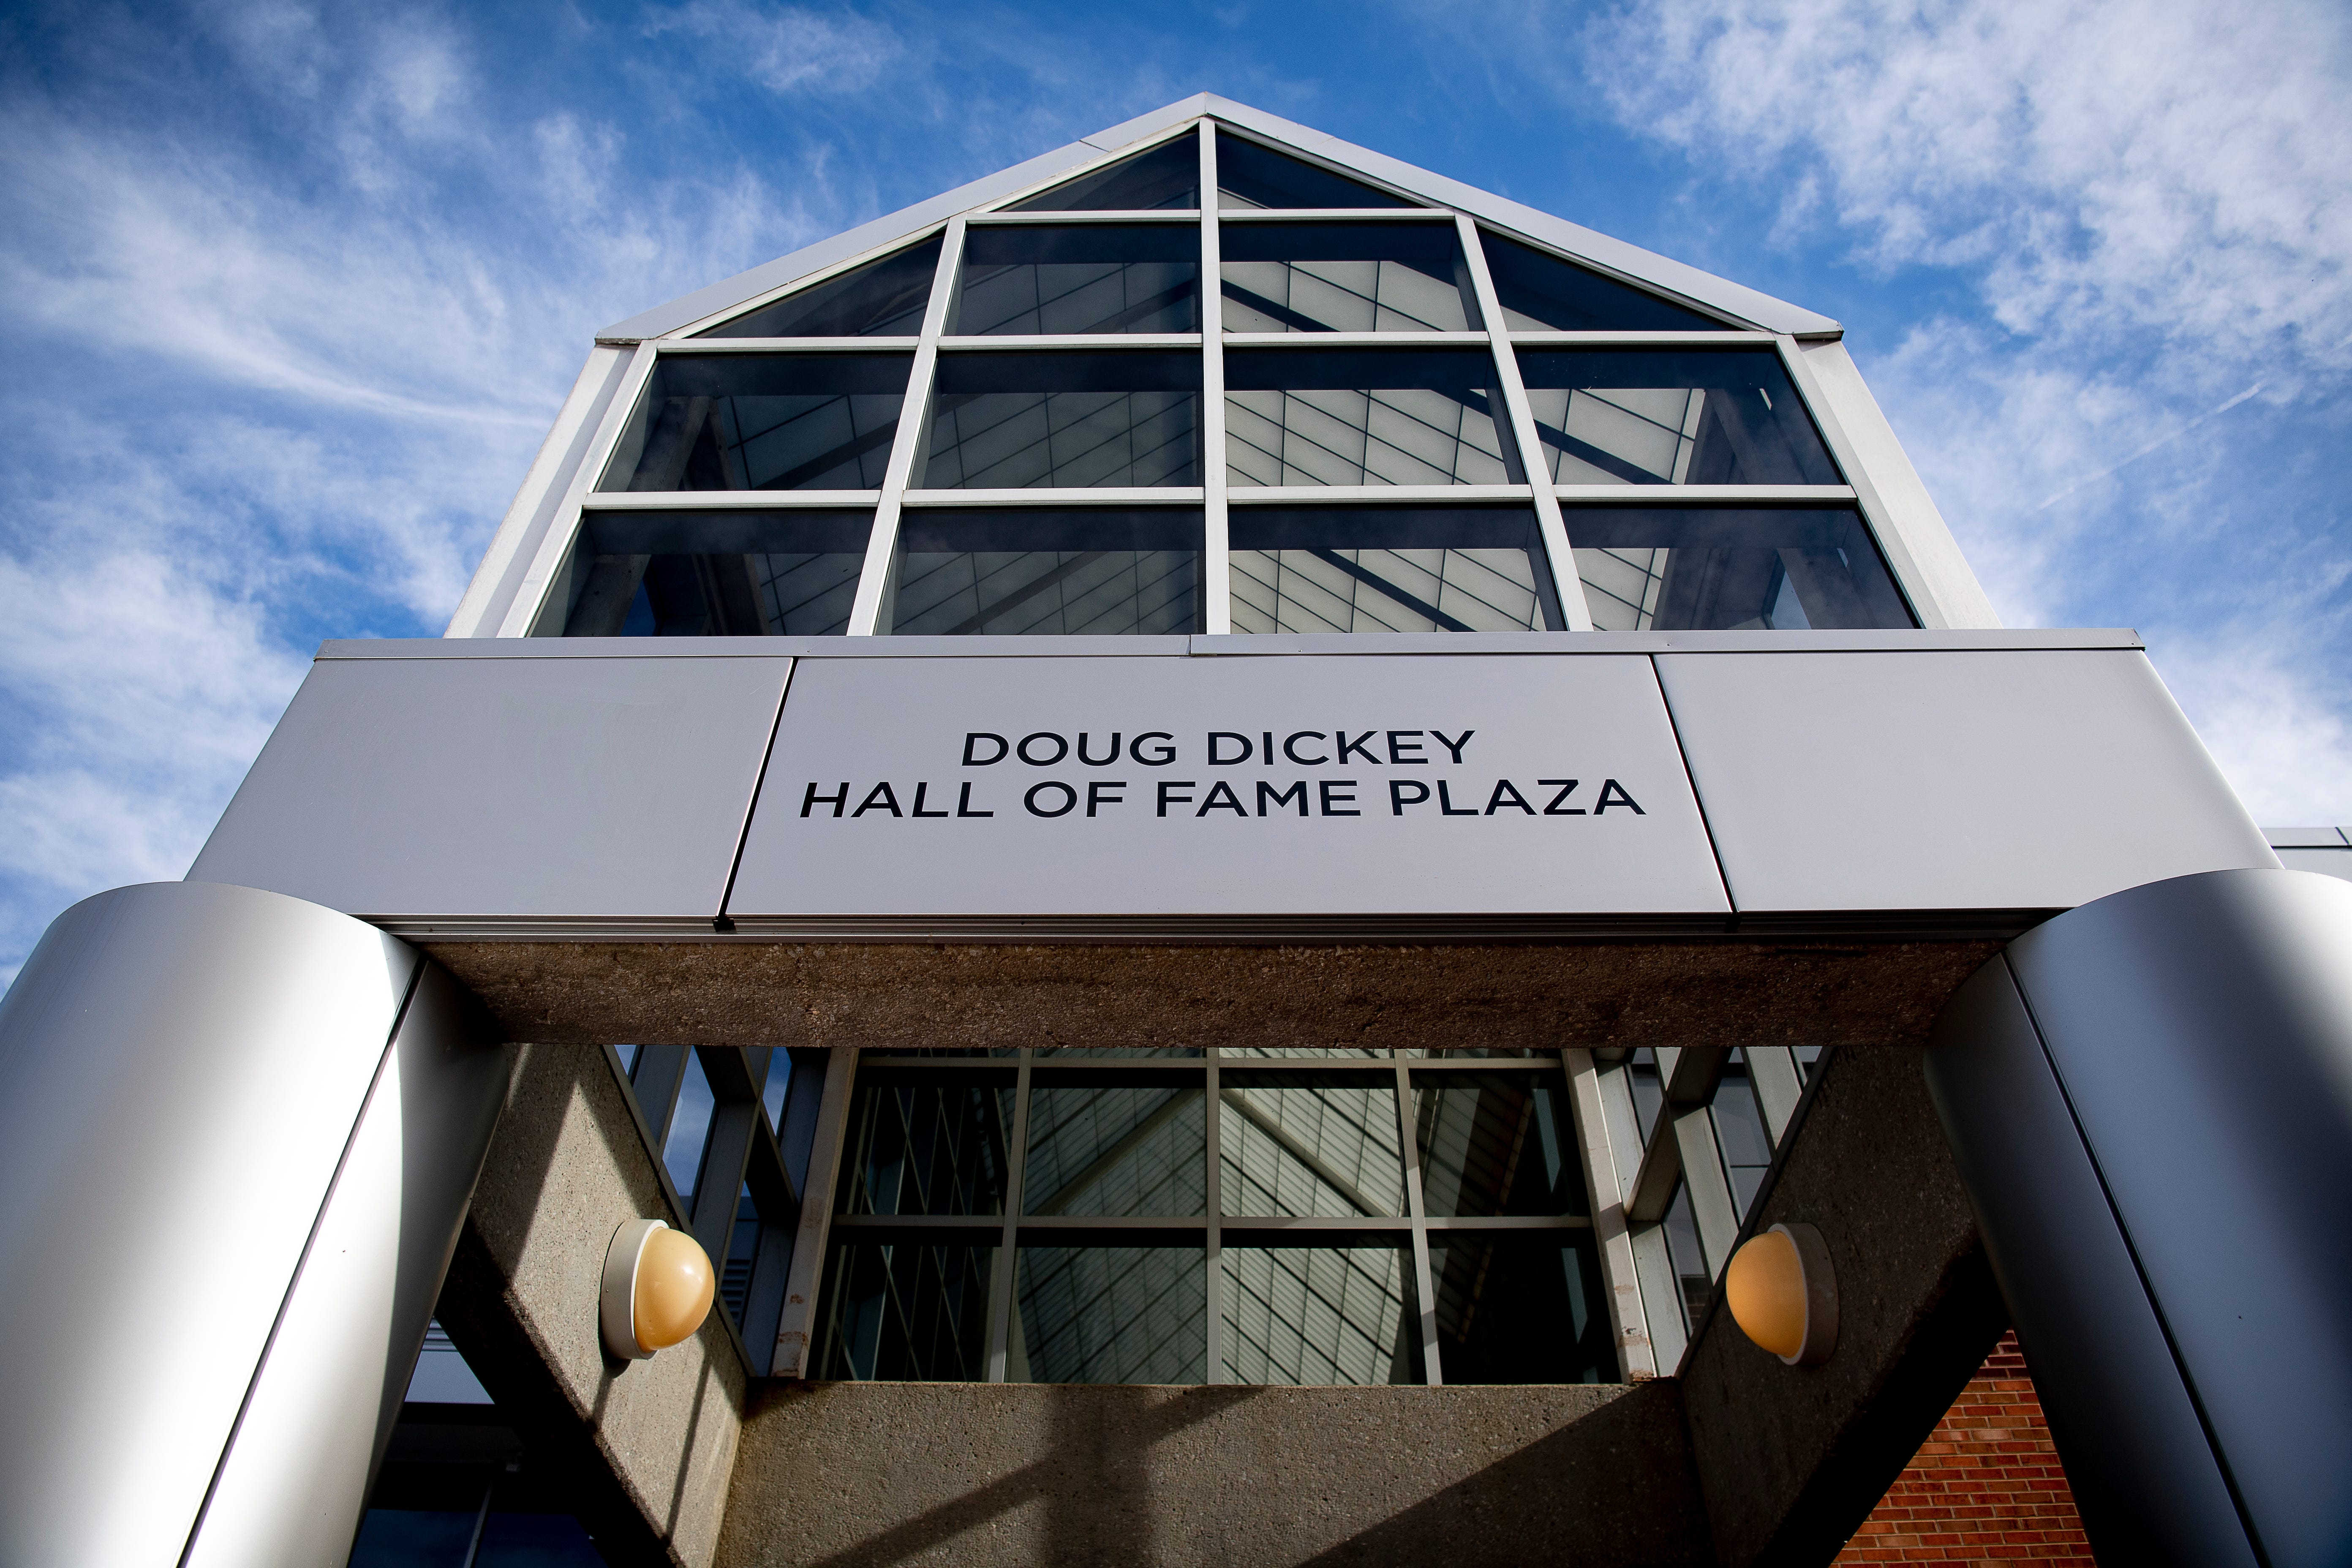 The Doug Dickey Hall of Fame Plaza at the Neyland-Thompson Sports Complex in Knoxville, Tennessee on Friday, October 4, 2019. Dickey led UT to its second SEC title in 1969 and served as the Vols' Director of Athletics from 1986 to 2003.